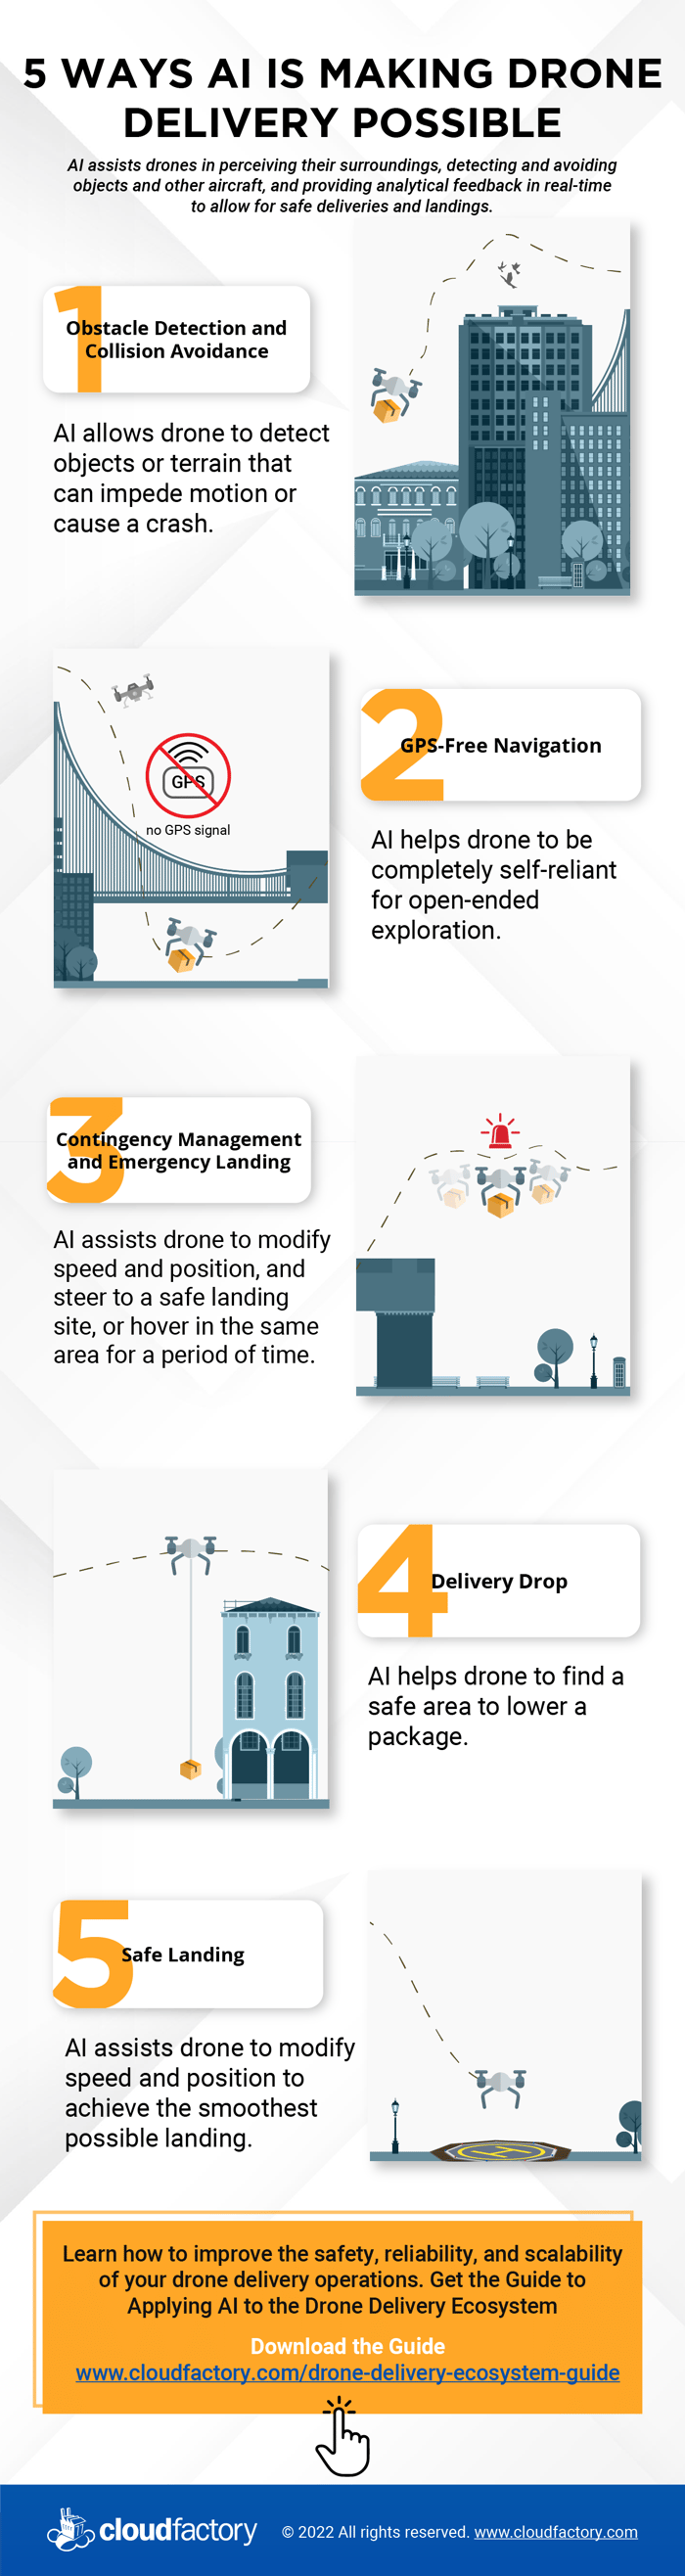 5 Ways AI is Making Drone Delivery Possible Infographic